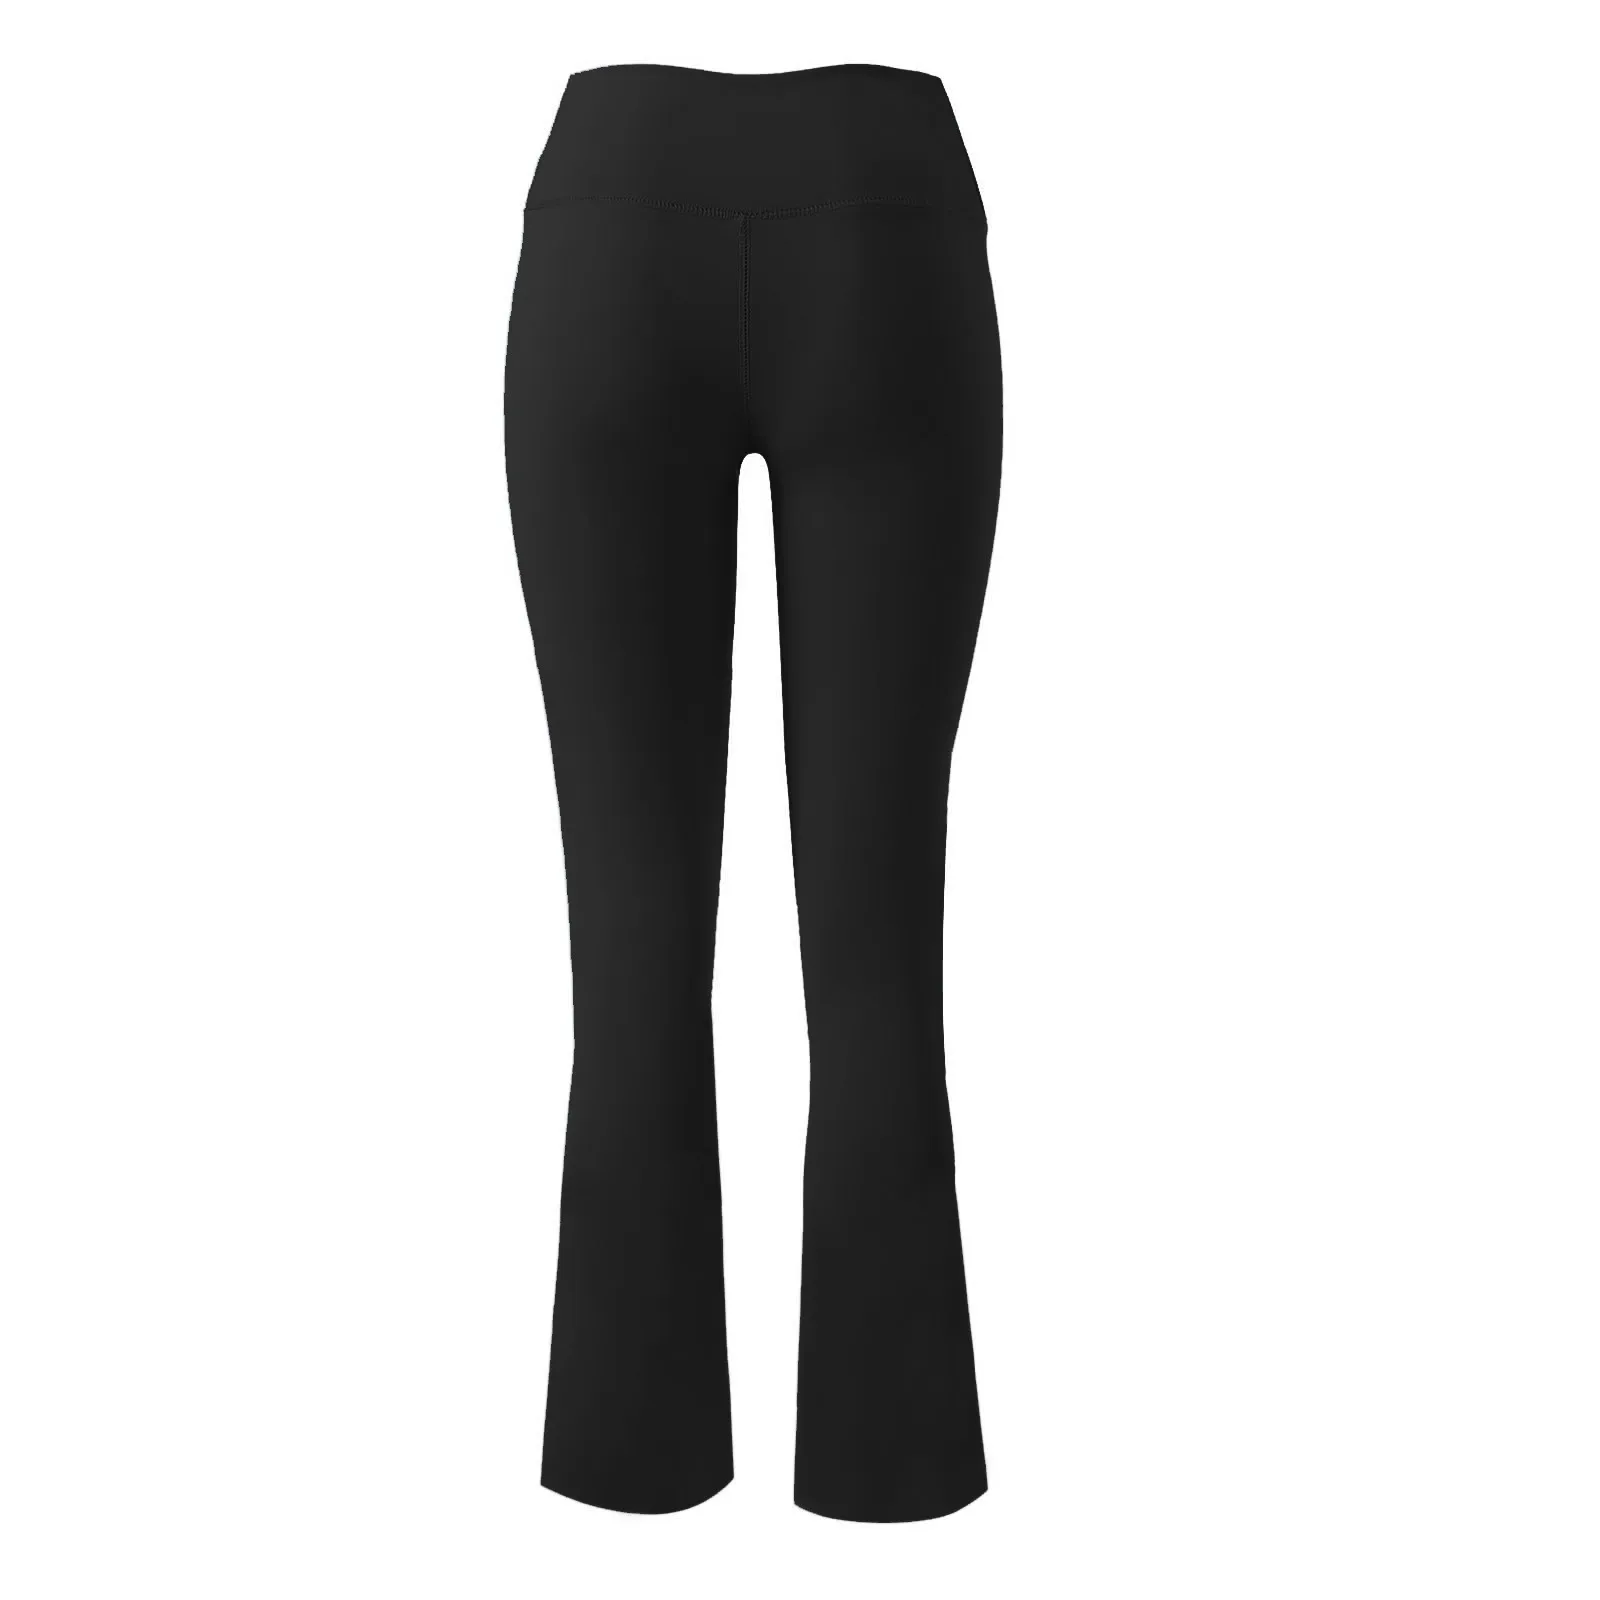 New Women's Fashion Solid High Waisted Flare Pants Workout Slim Leggings Casual Trousers Fitness Flared Leggings Leggins Mujer yoga leggings